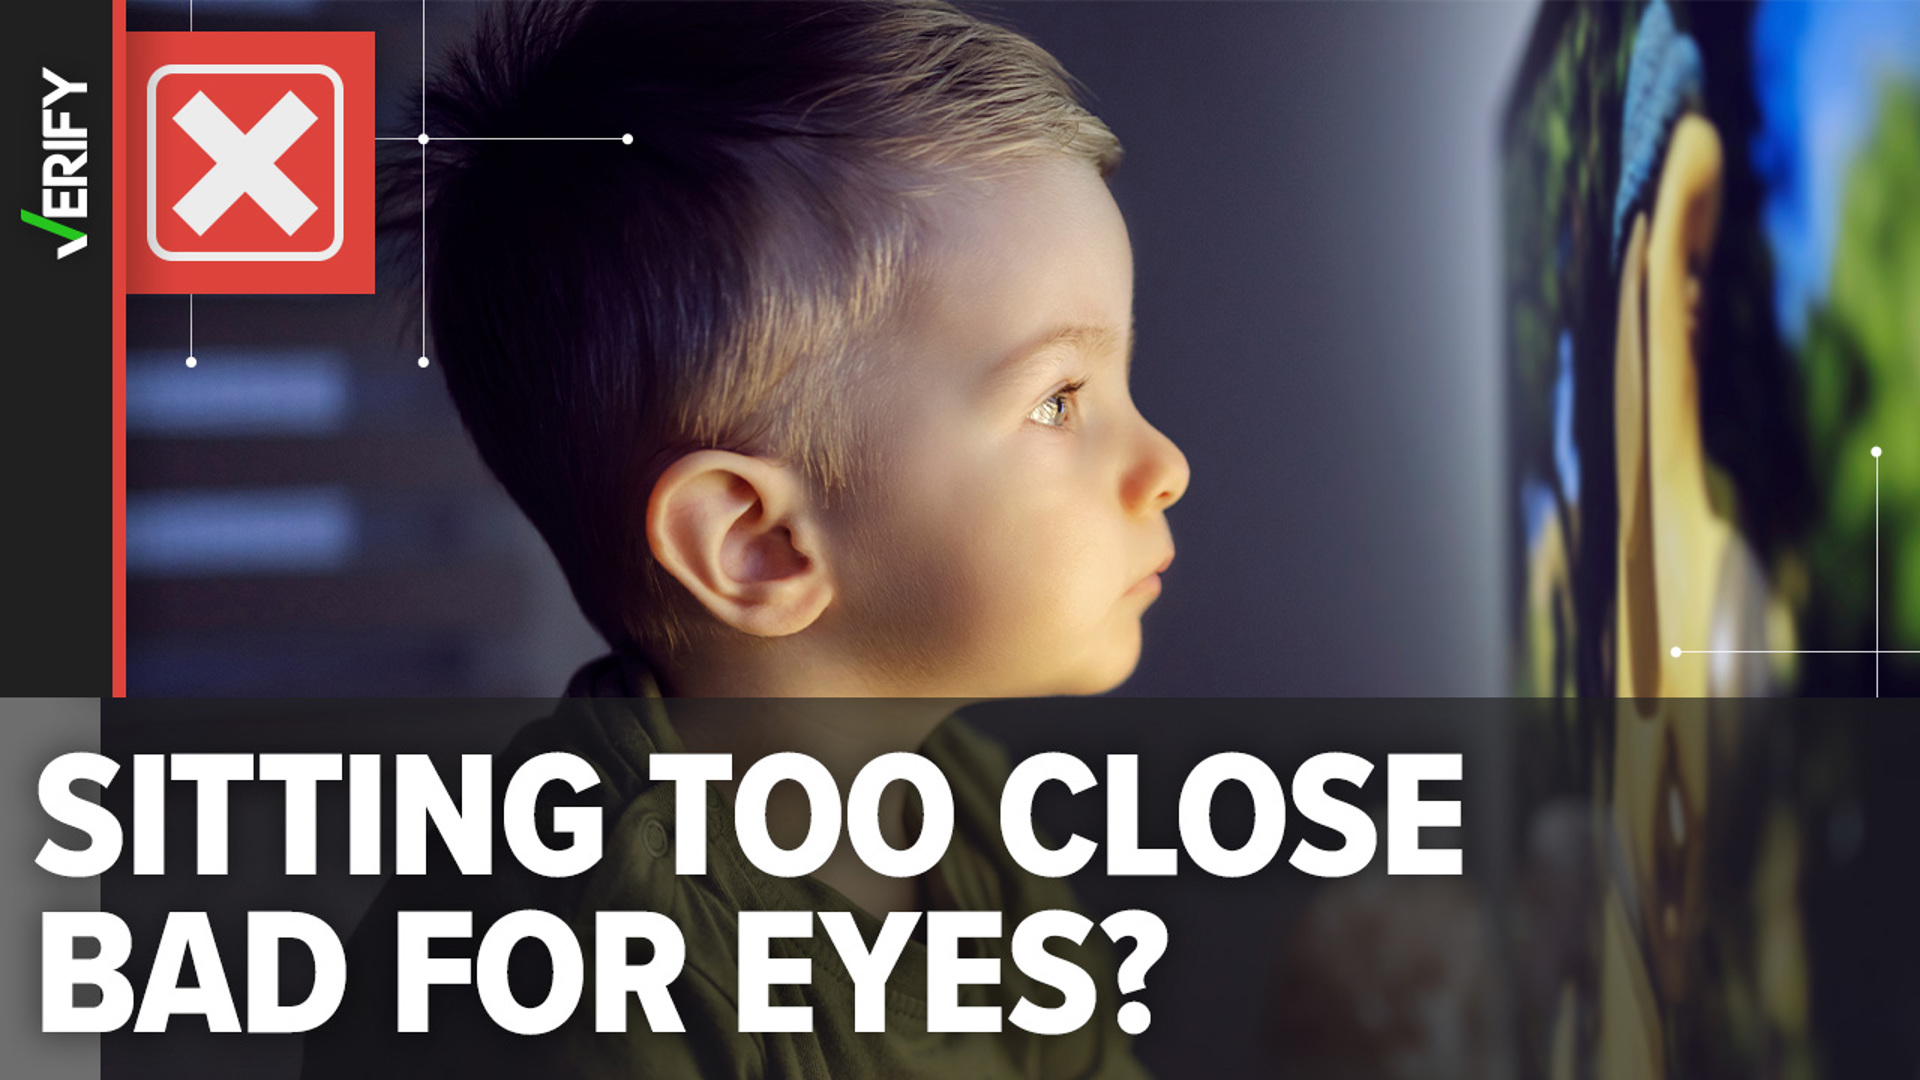 Contrary to popular belief, there’s no evidence to suggest that sitting too close to the TV causes eye damage in children or adults.